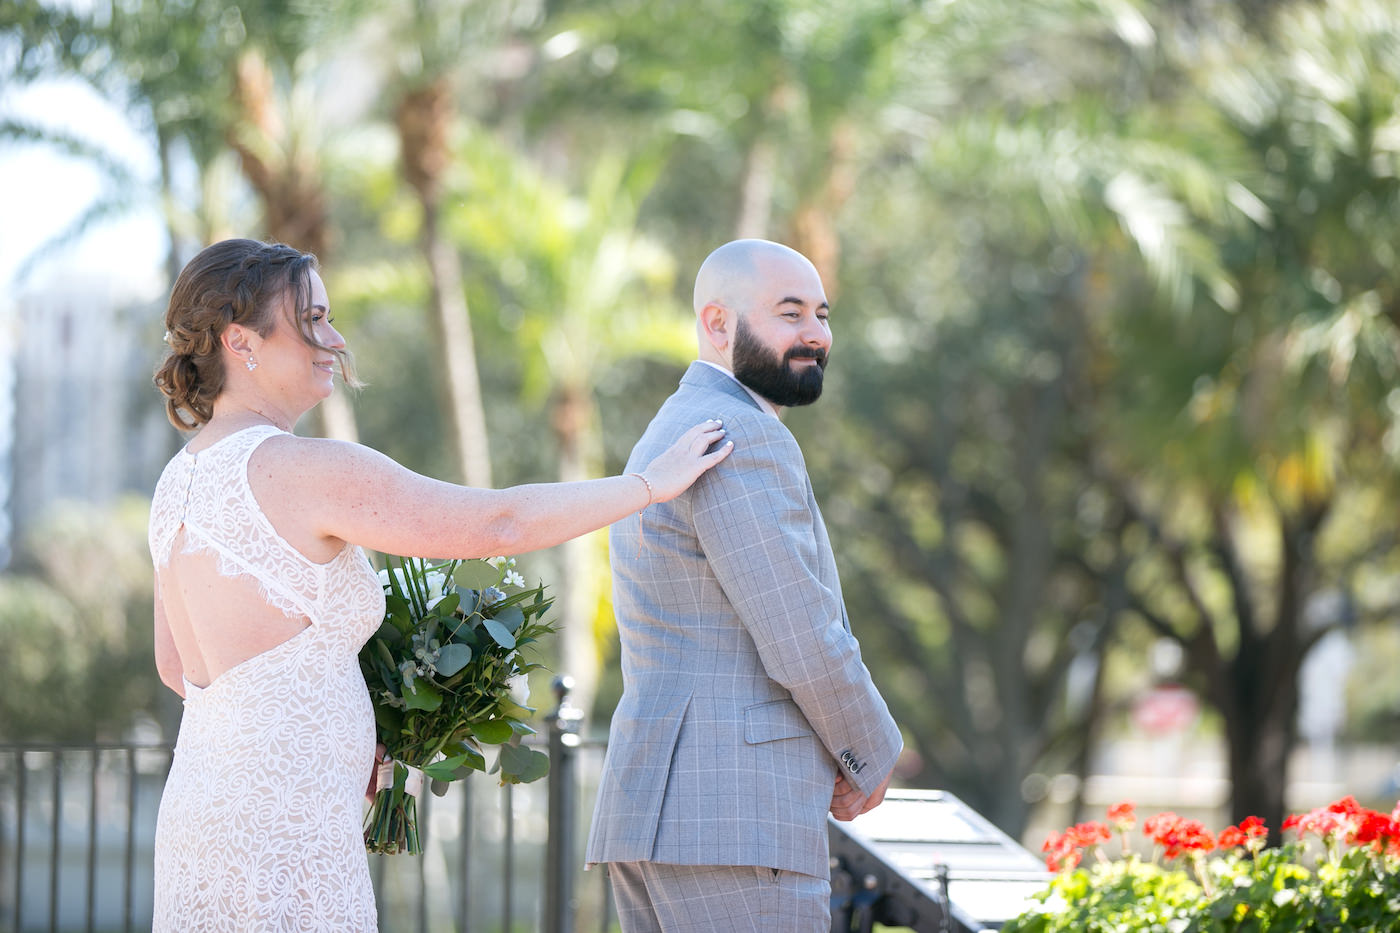 Florida Bride and Groom Outdoor First Look Portrait | Wedding Photographer Carrie Wildes Photography